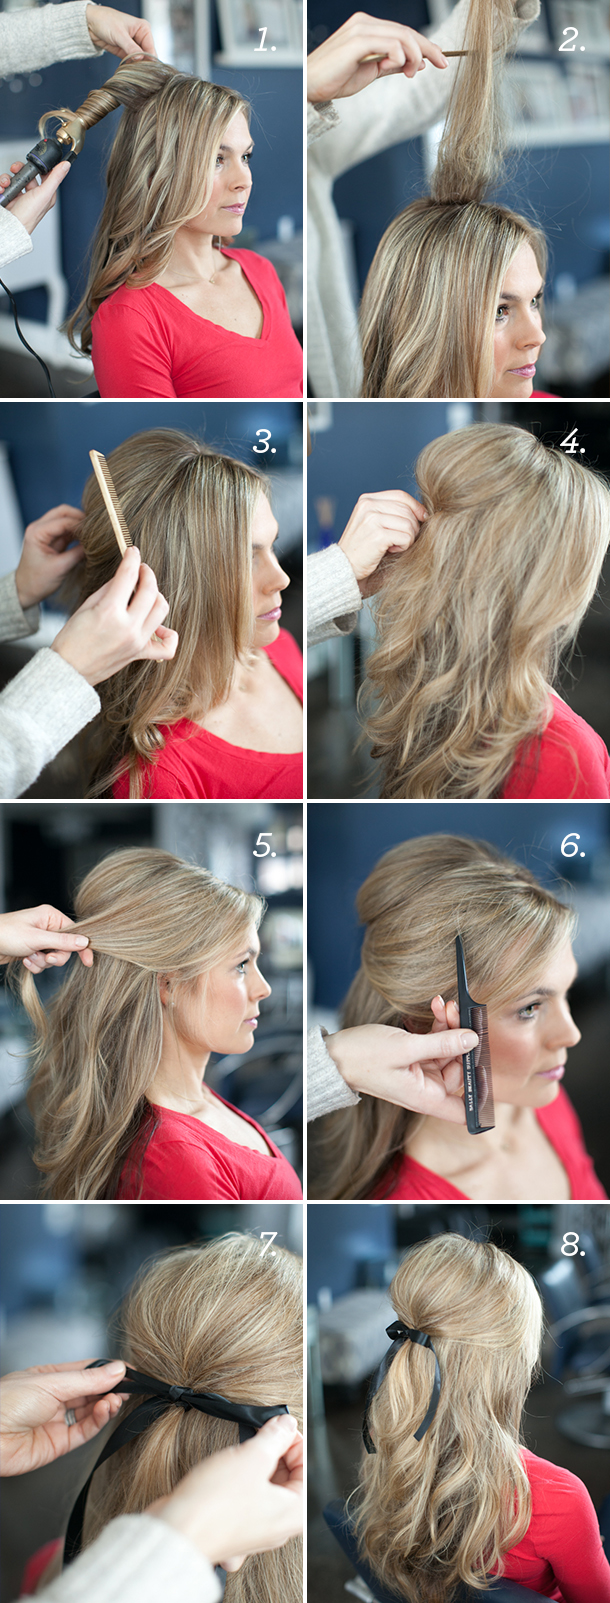 15 Super Easy Half-Up Hairstyle Tutorials You Have To Try - fashionsy.com